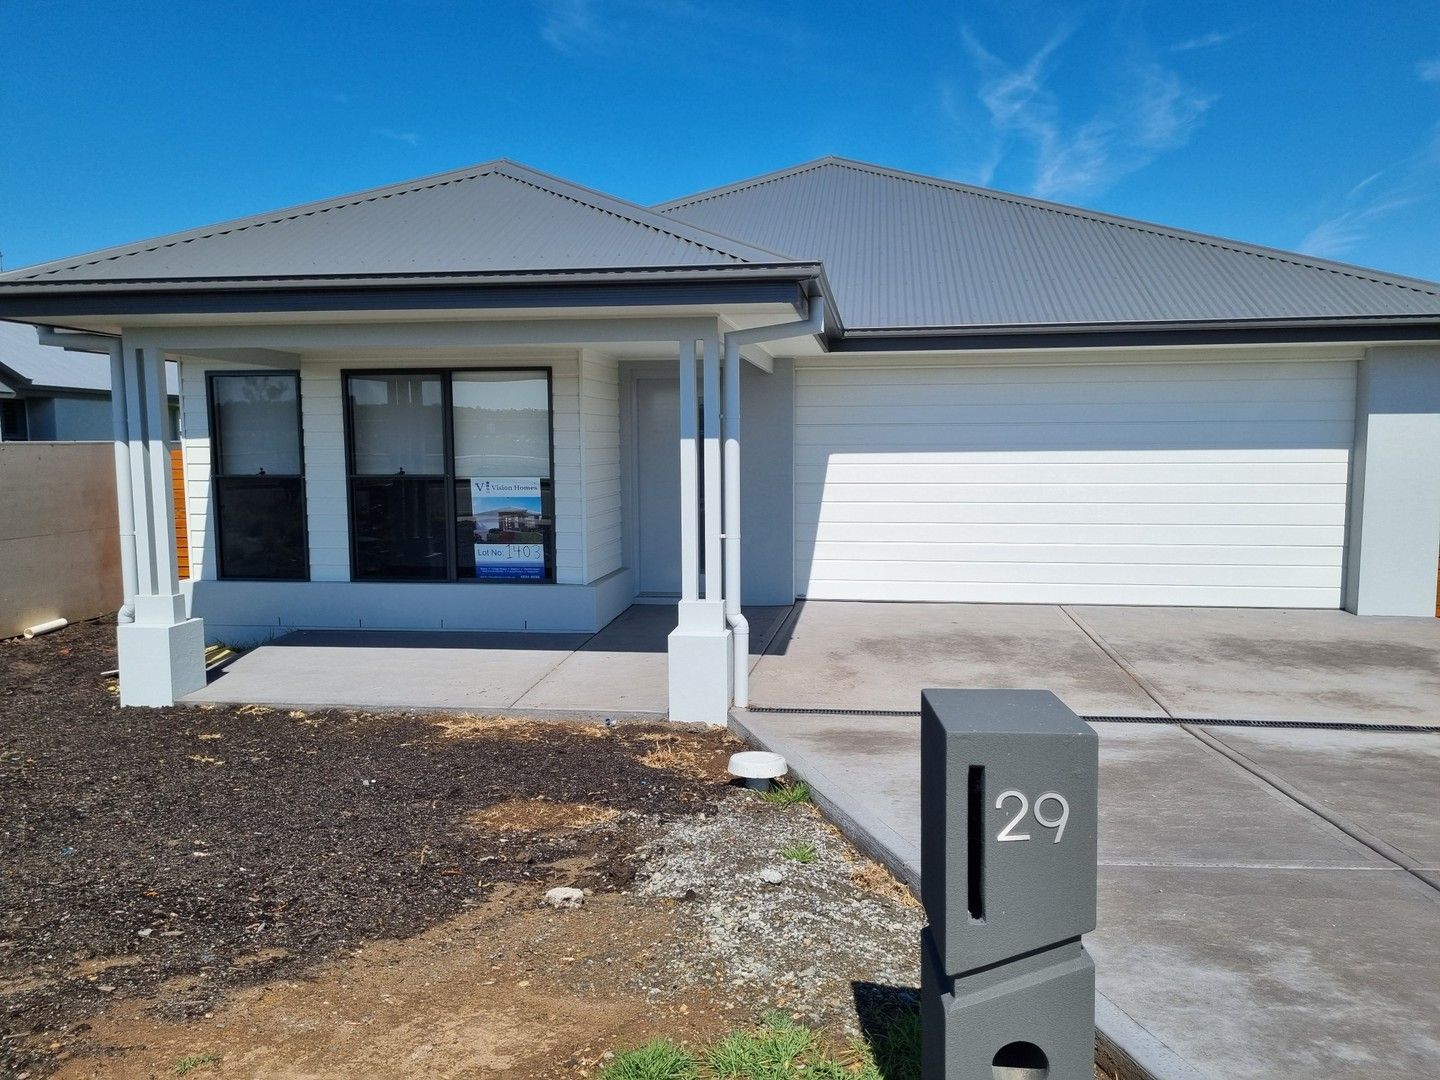 4 bedrooms House in 29 kesterton rise NORTH ROTHBURY NSW, 2335